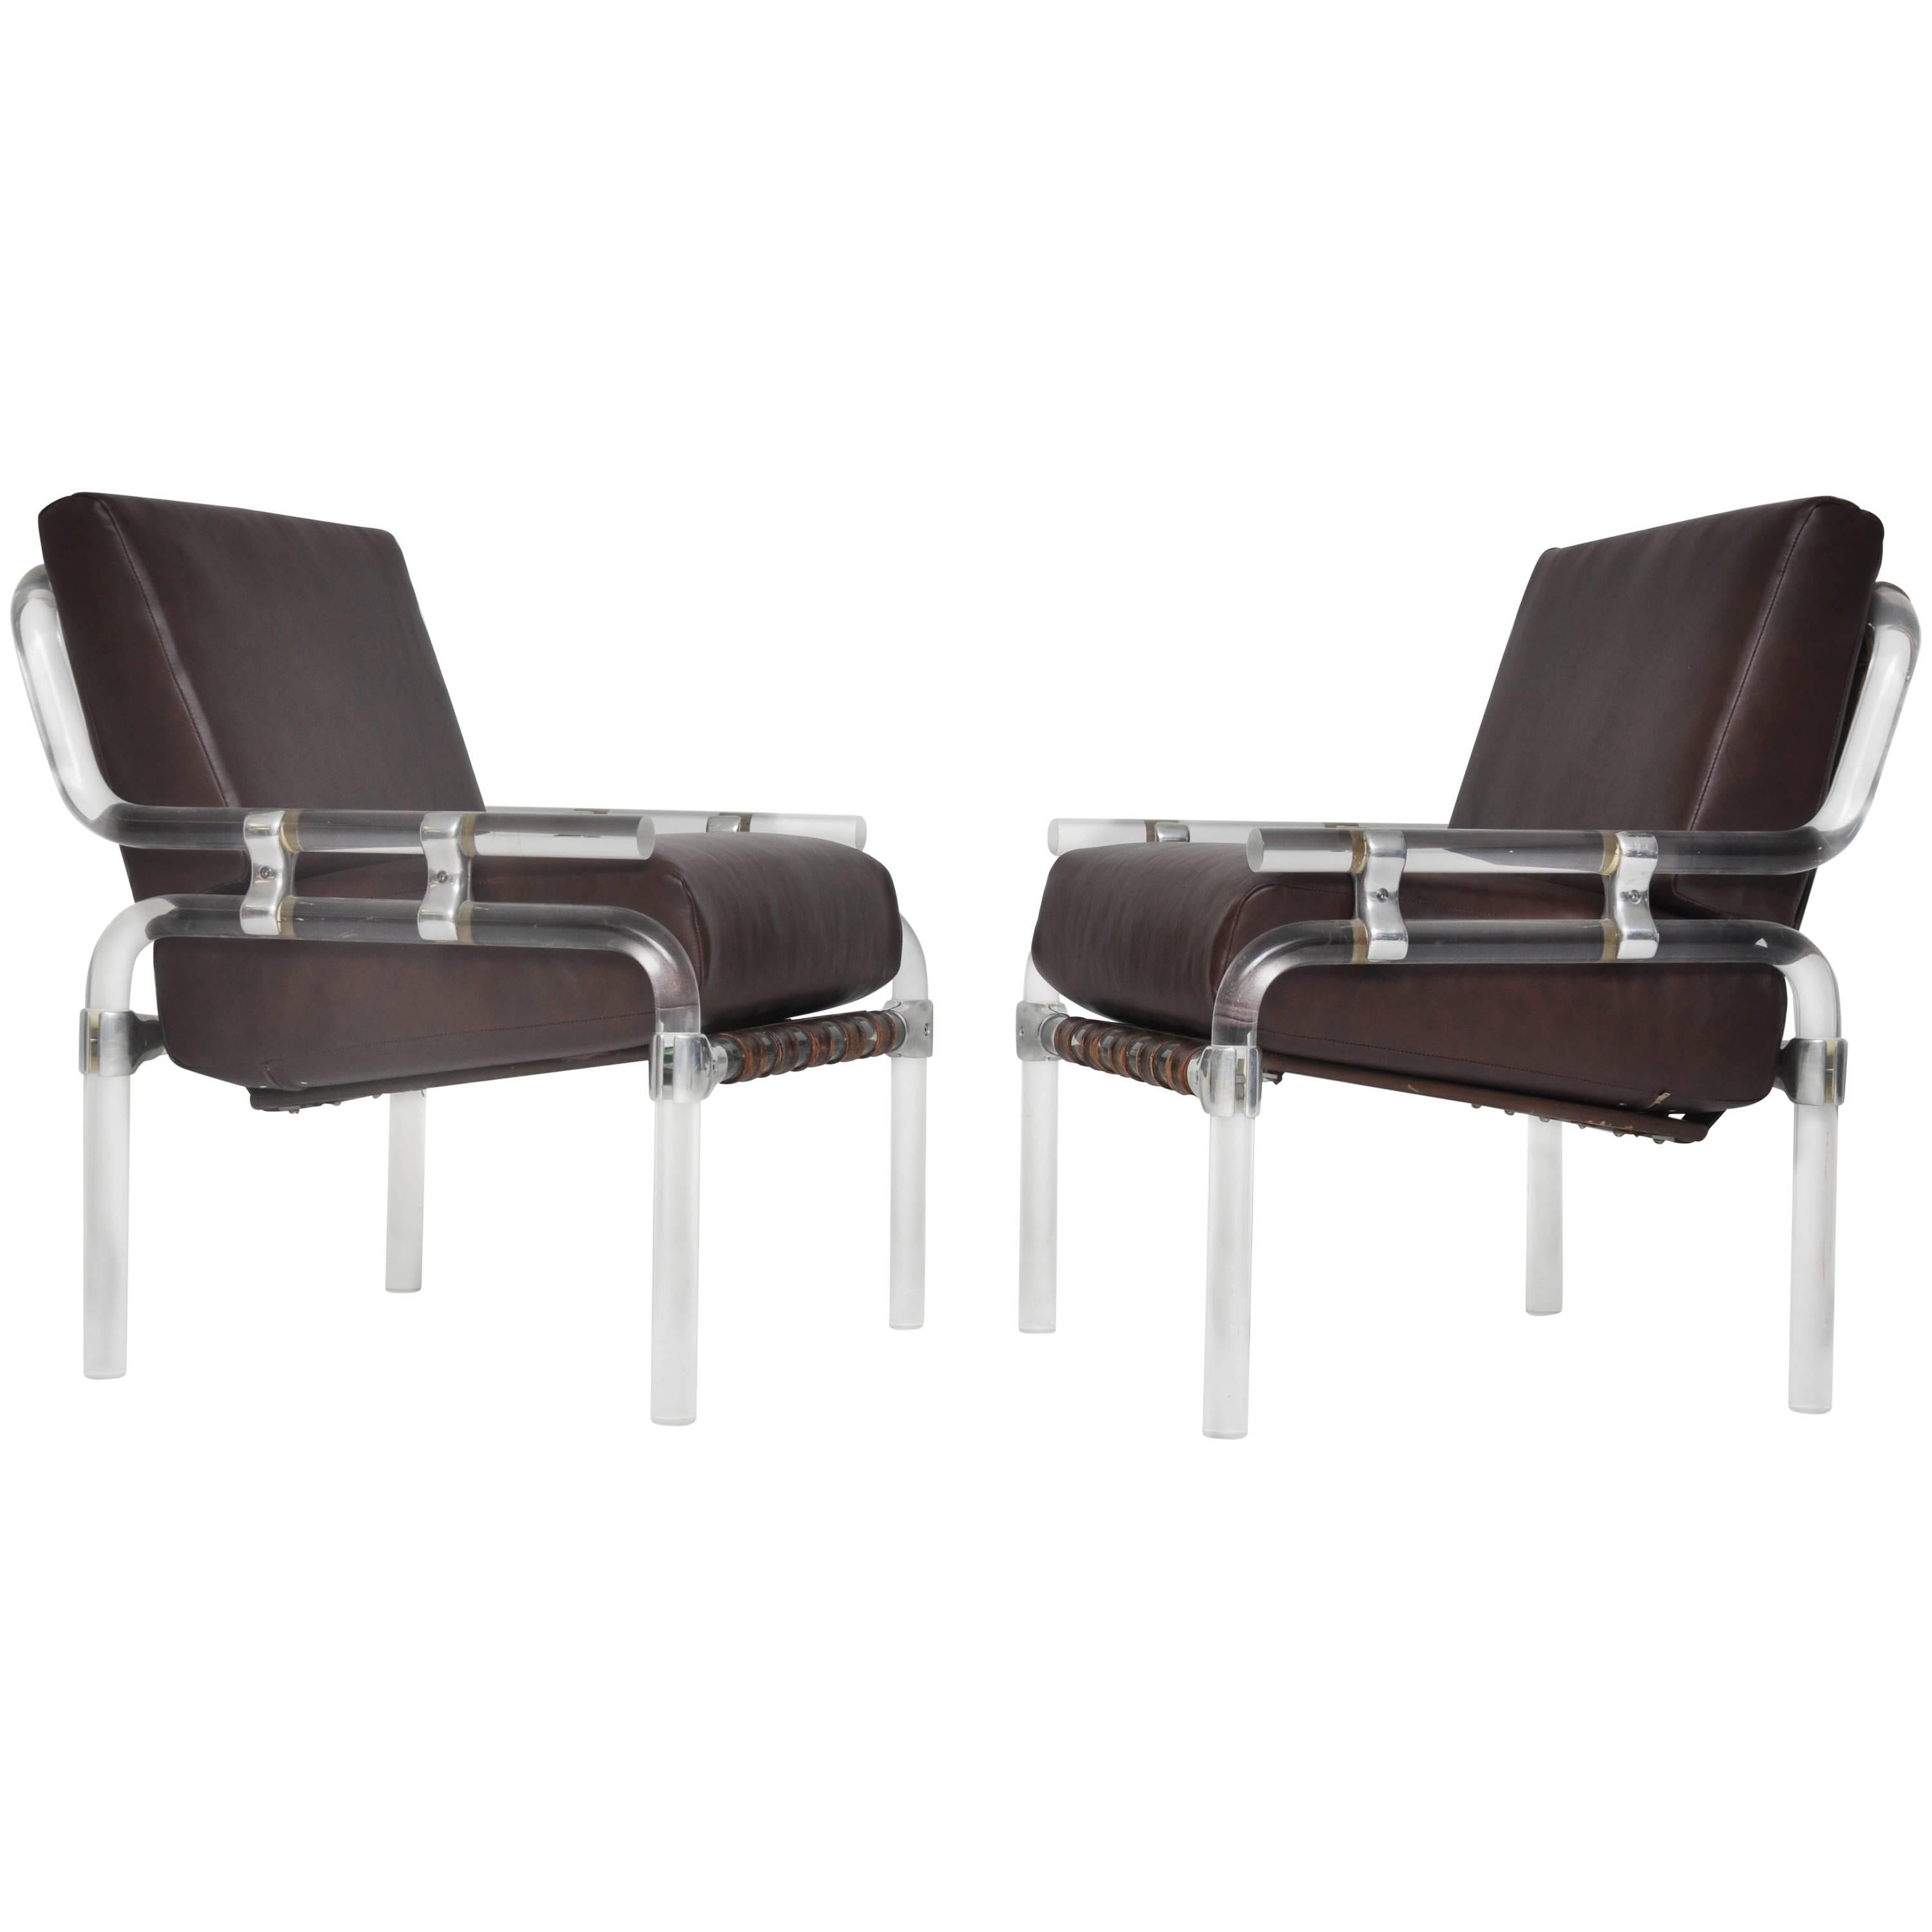 Lucite Pair of "1000 Pipe Line Series Chairs" by Jeff Messerschmidt